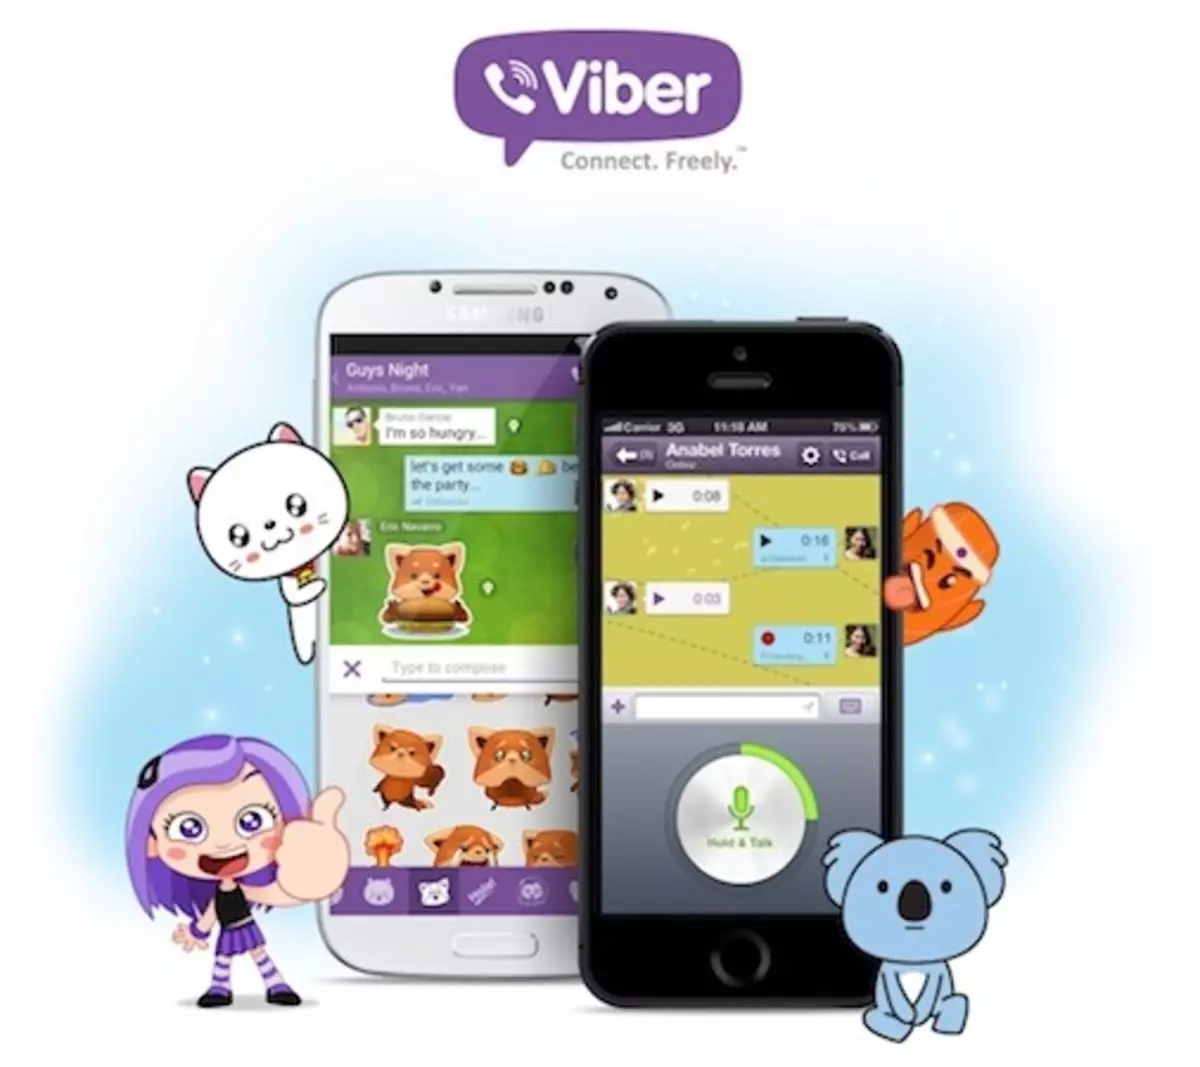 How to update Viber on Android and iOS